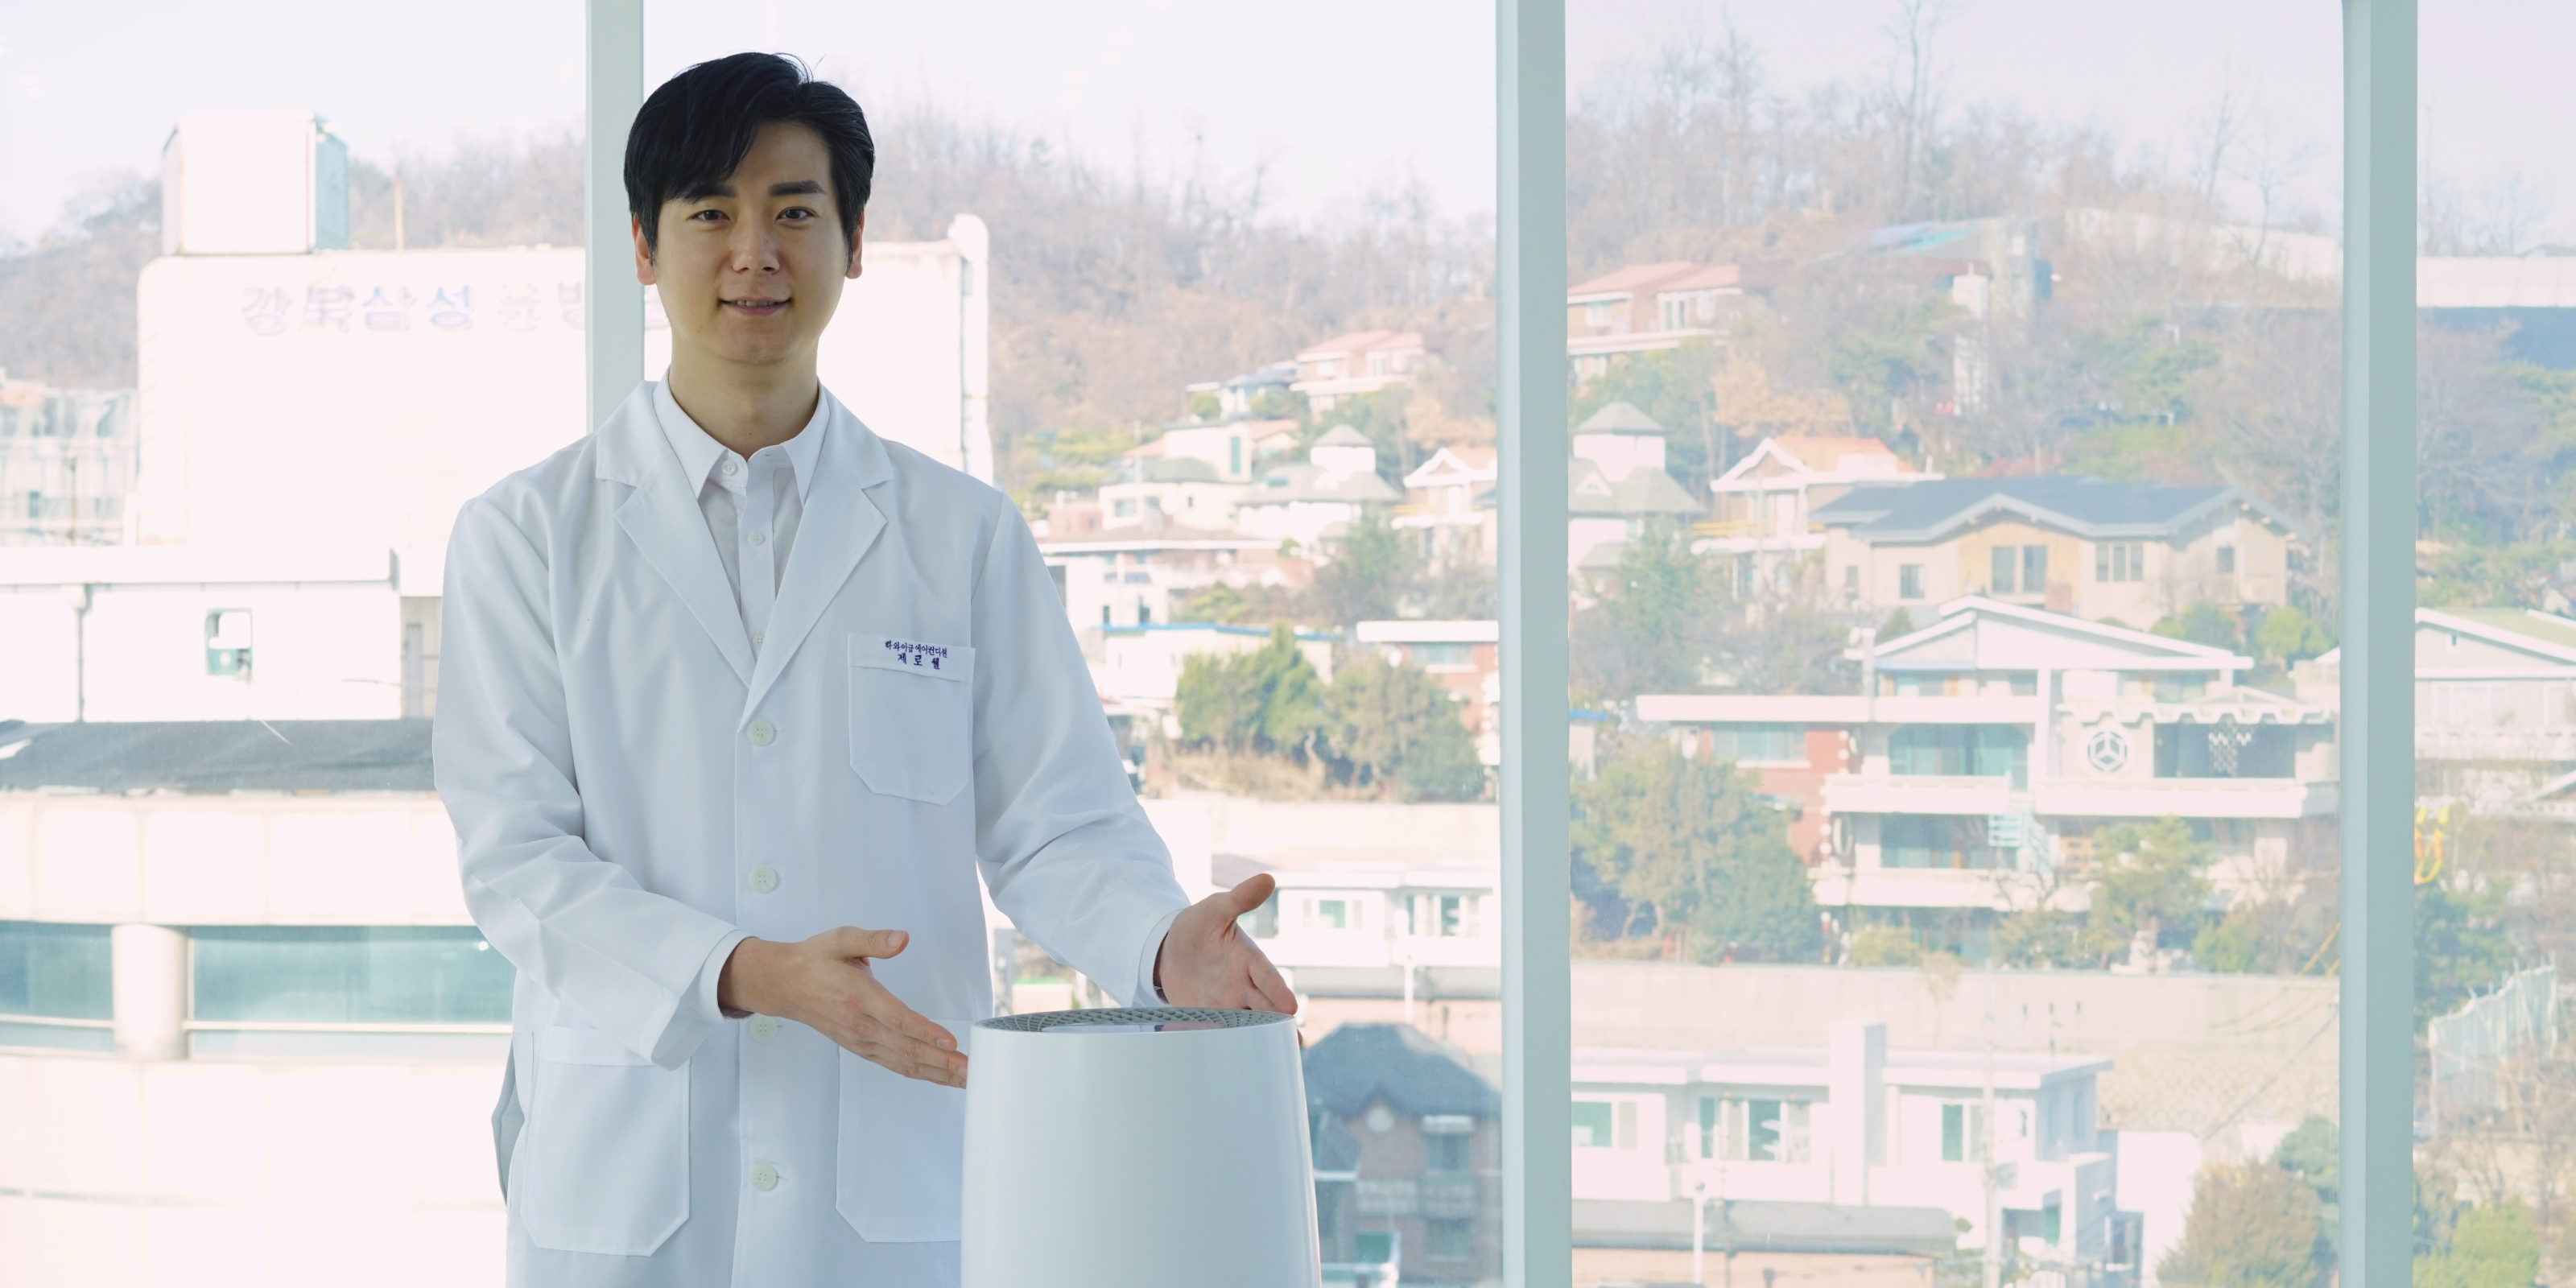 Company founder in lab coat gesturing to Zenwell appliance